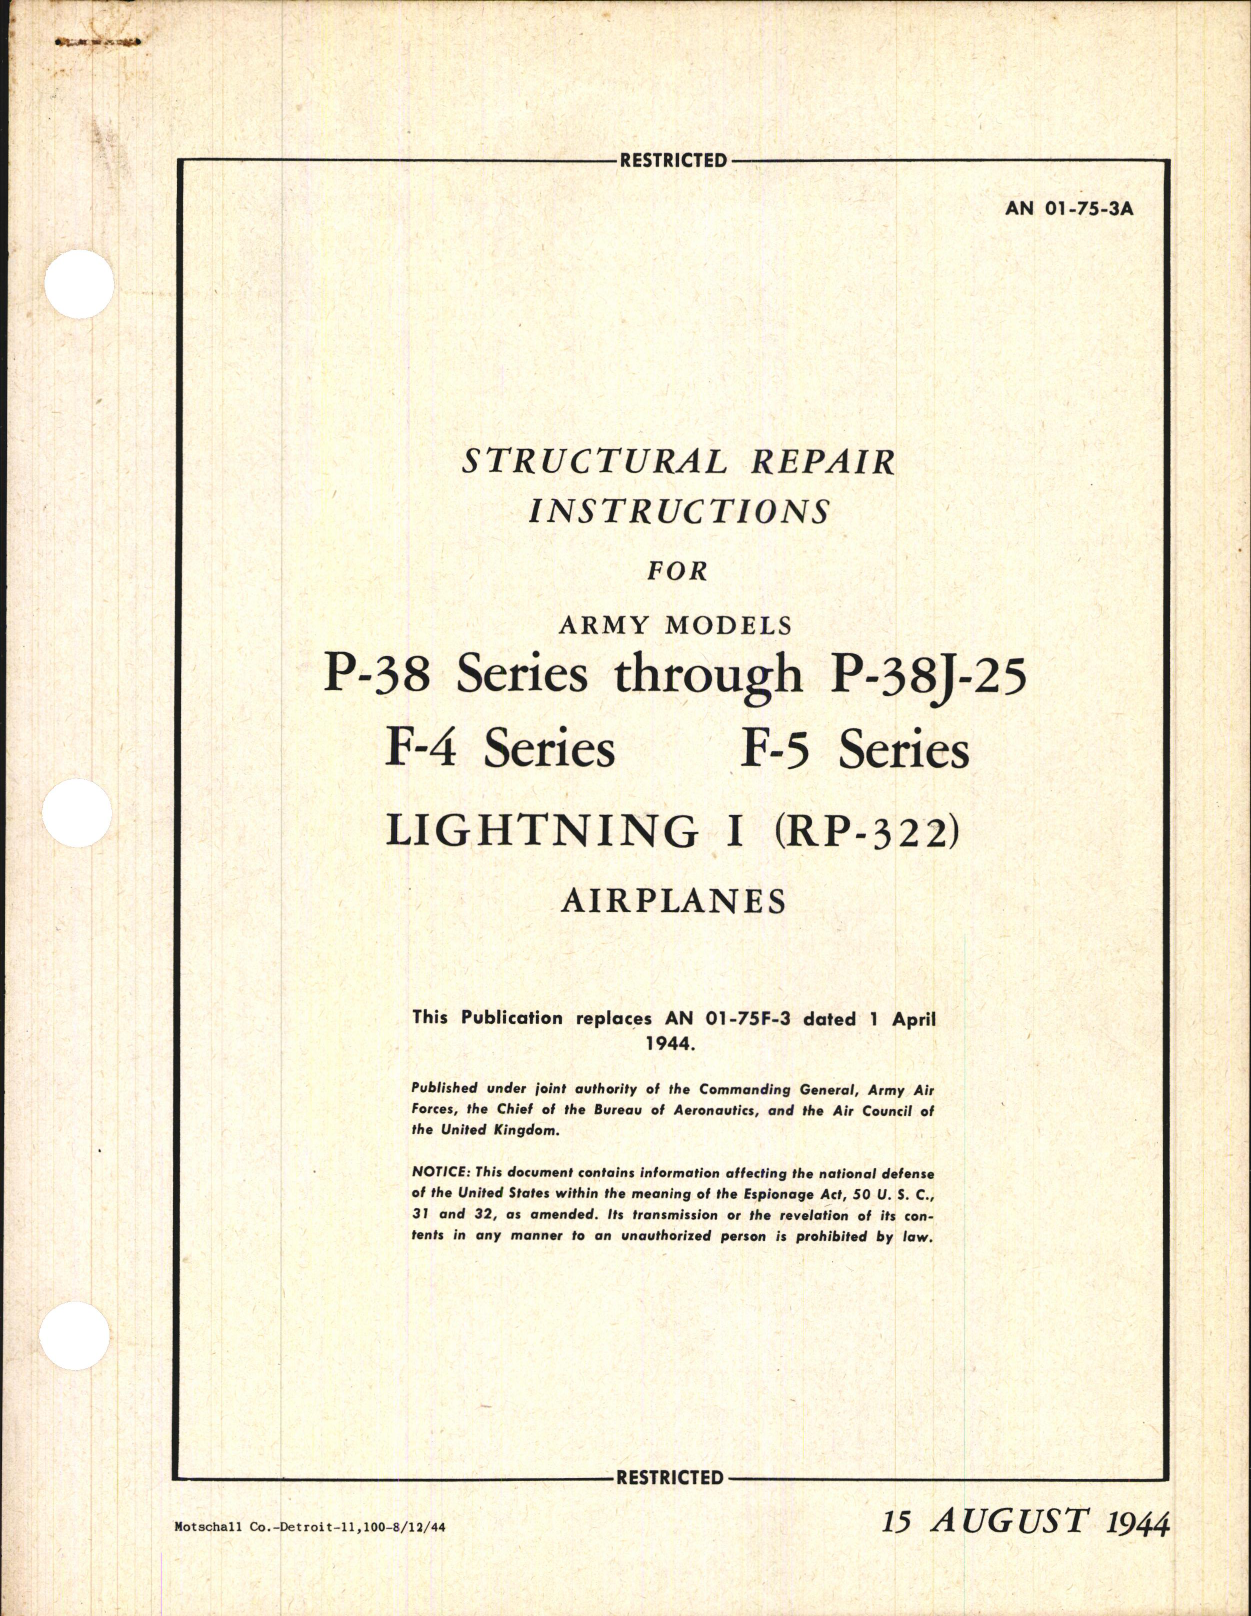 Sample page 1 from AirCorps Library document: Structural Repair Instructions for P-38 Series through P-38J-25, F-4 and F-5 Series